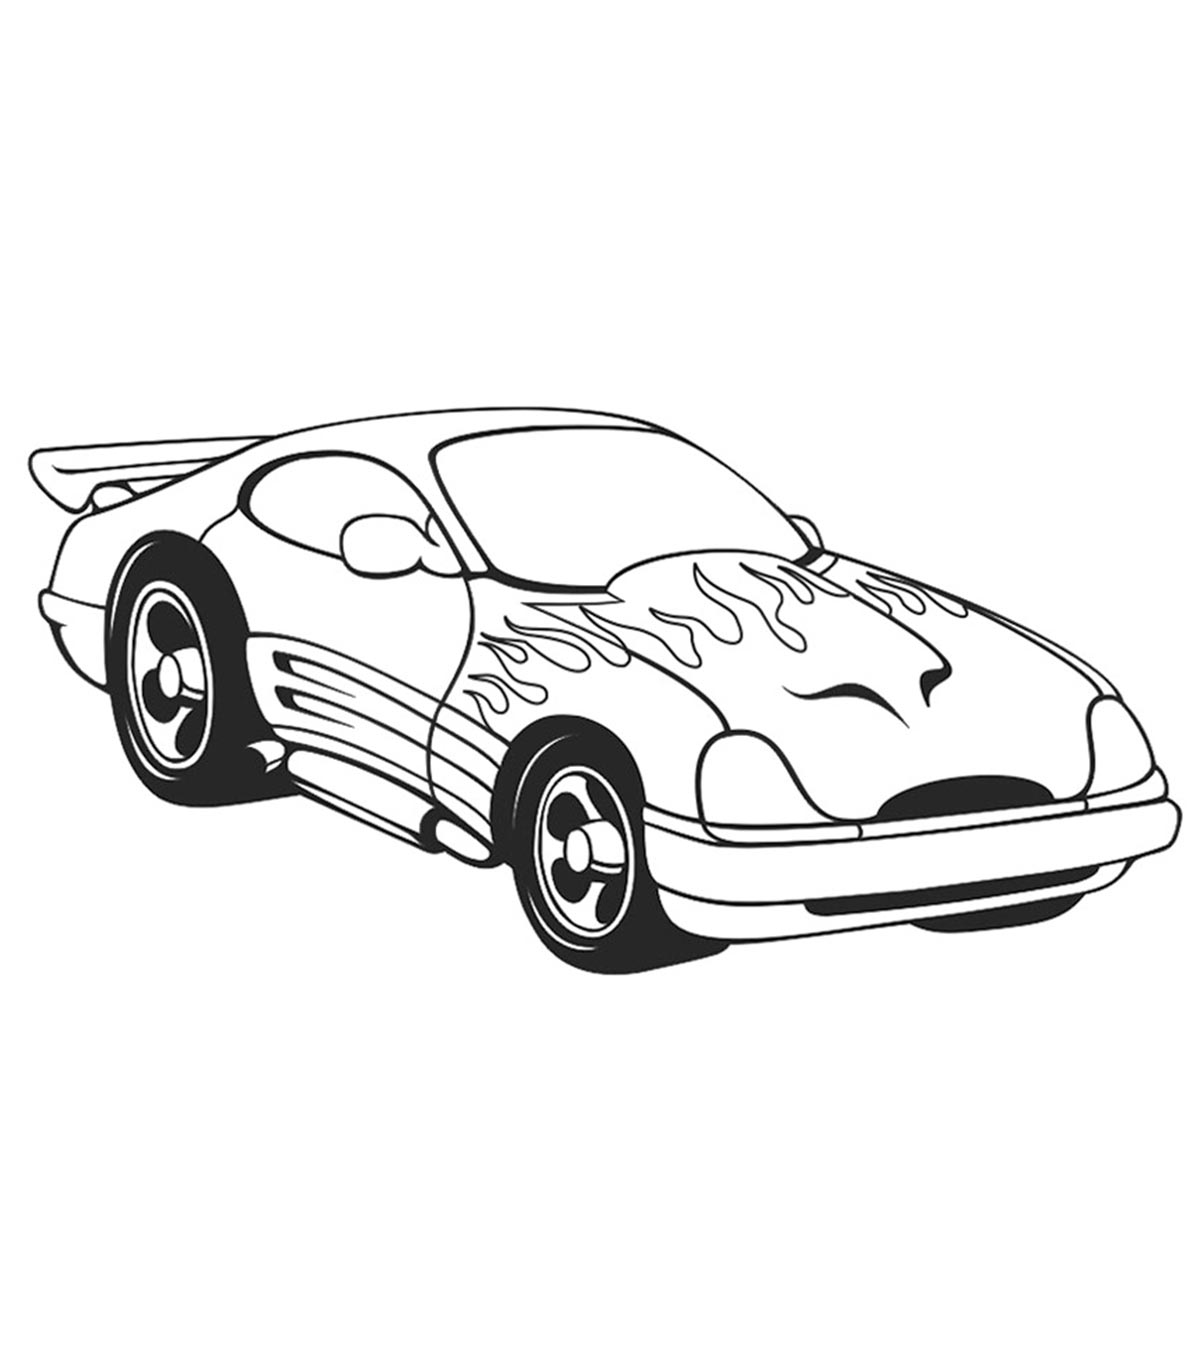 20 Interesting Sports Car Coloring Pages For Your Sports Lover Kids_image